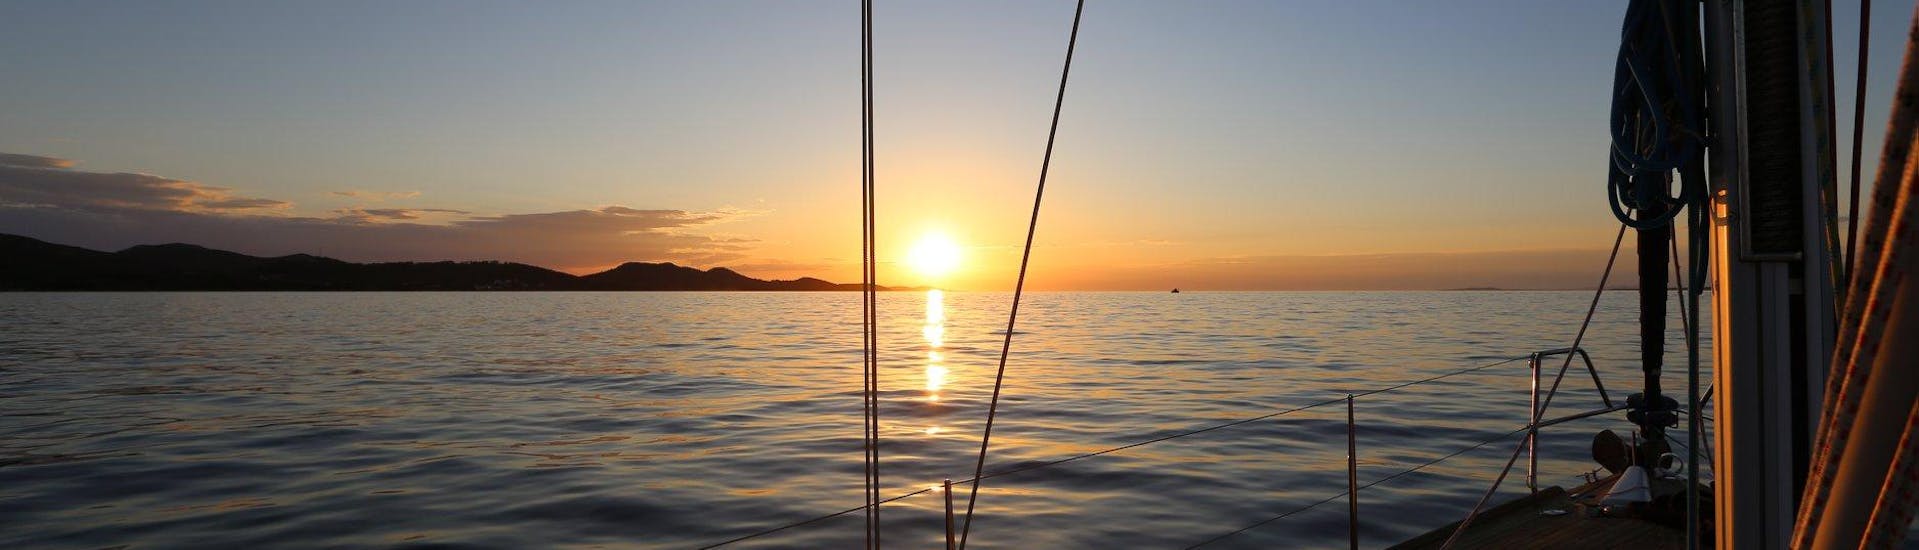 The sun sents during a sailing trip around Losinj Bay with The Day Sail Croatia.